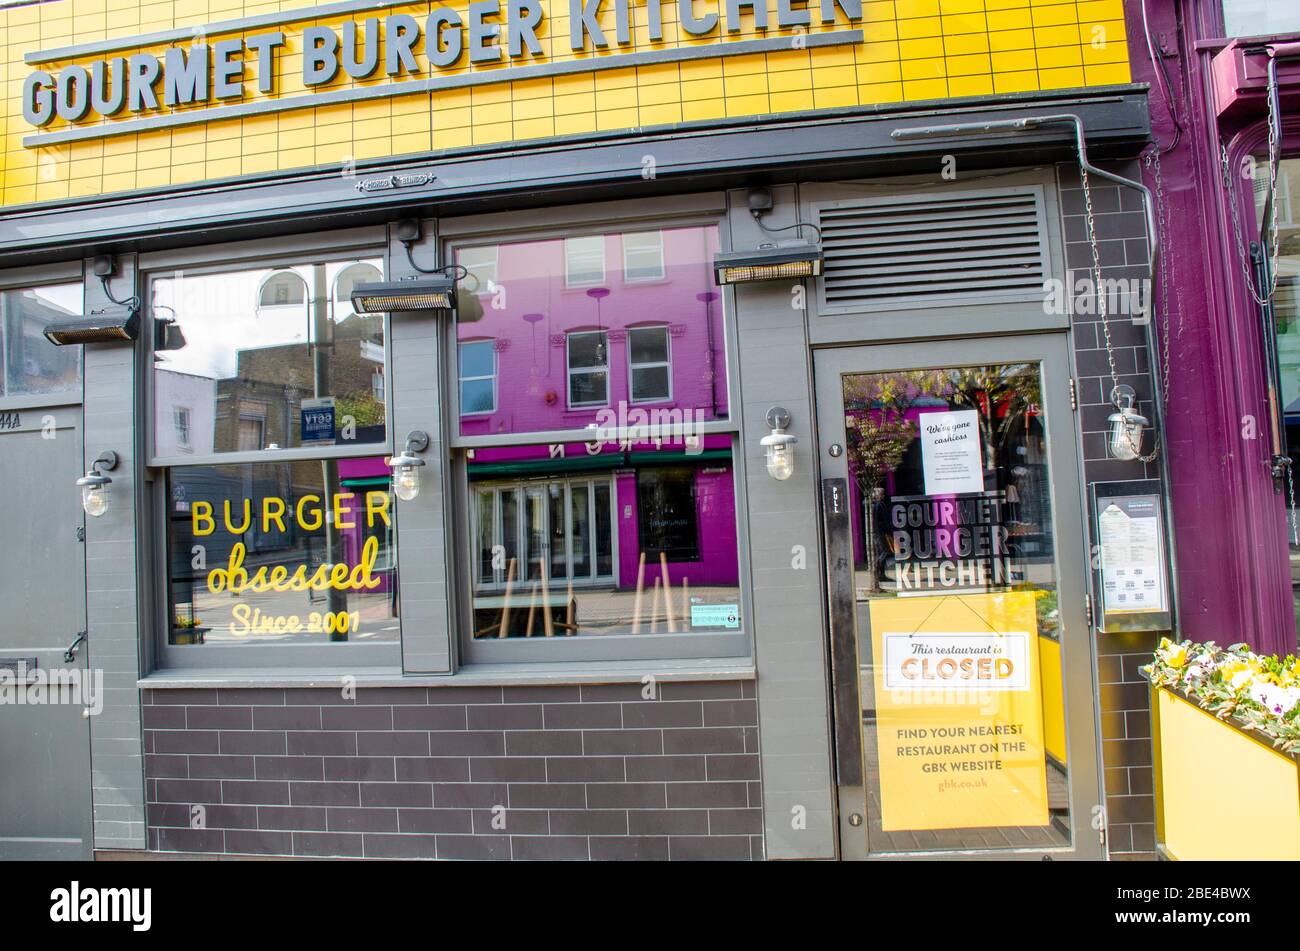 London, UK, 6 April 2020 Gourmet Burger Kitchen, 44 Northcote Rd, London SW11 1NZ. Signs in shop windows showing closed due to coronavirus. Stock Photo